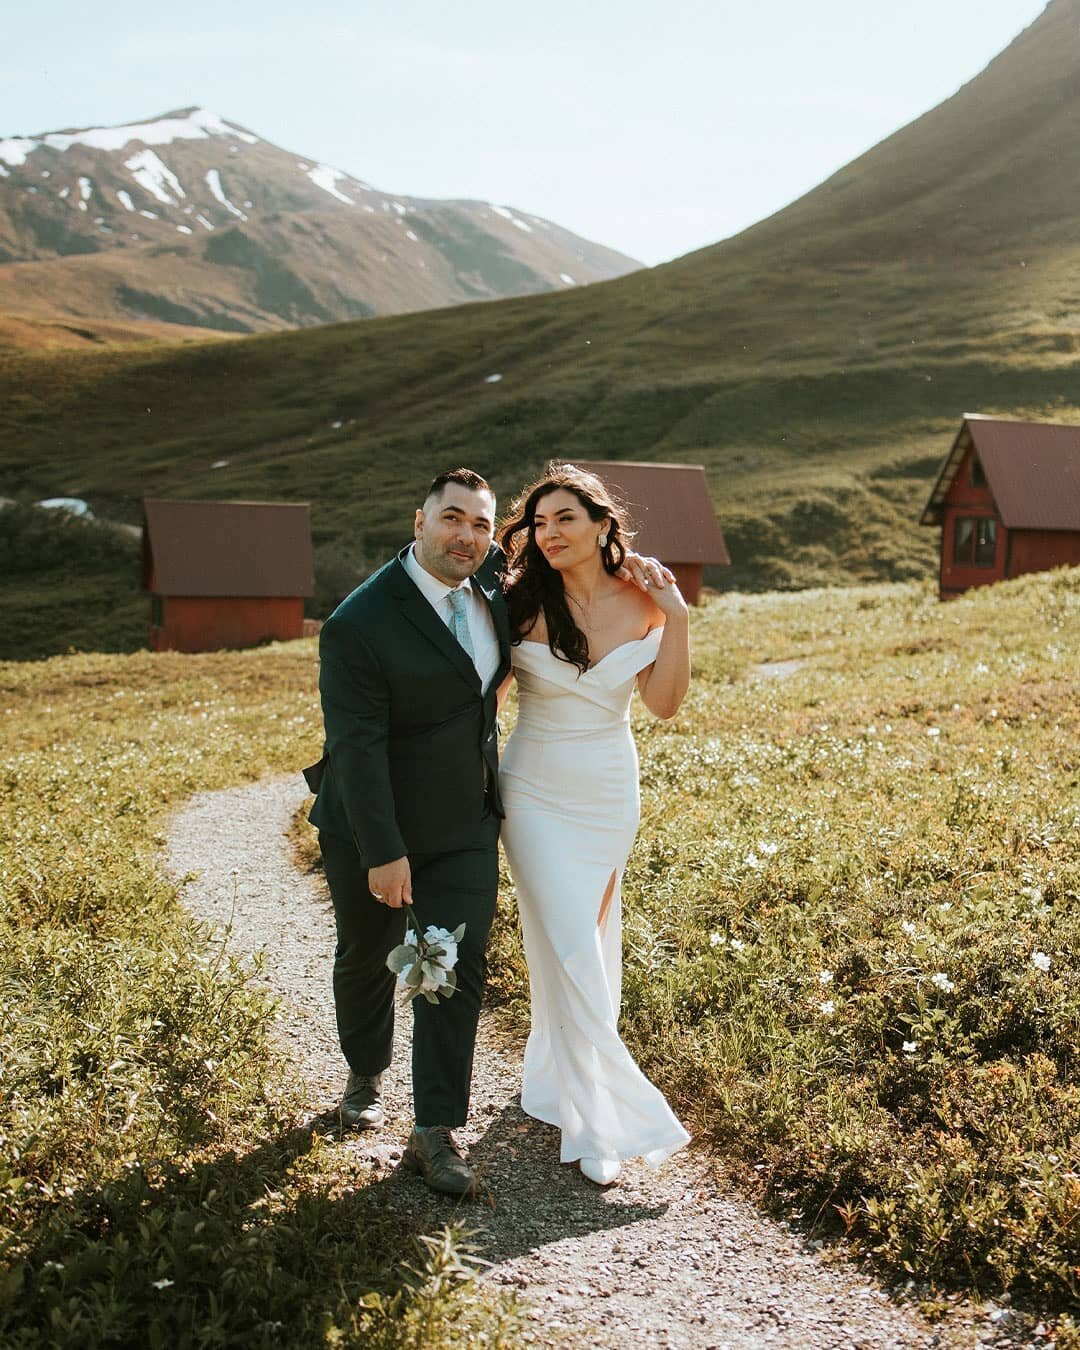 It's never too late to get your wedding photos done (or redone)!

Vanessa and Frank eloped years ago but never got the photos they dreamt of. For their anniversary we got to head to the mountains in their gorgeous attire and capture their wedding por